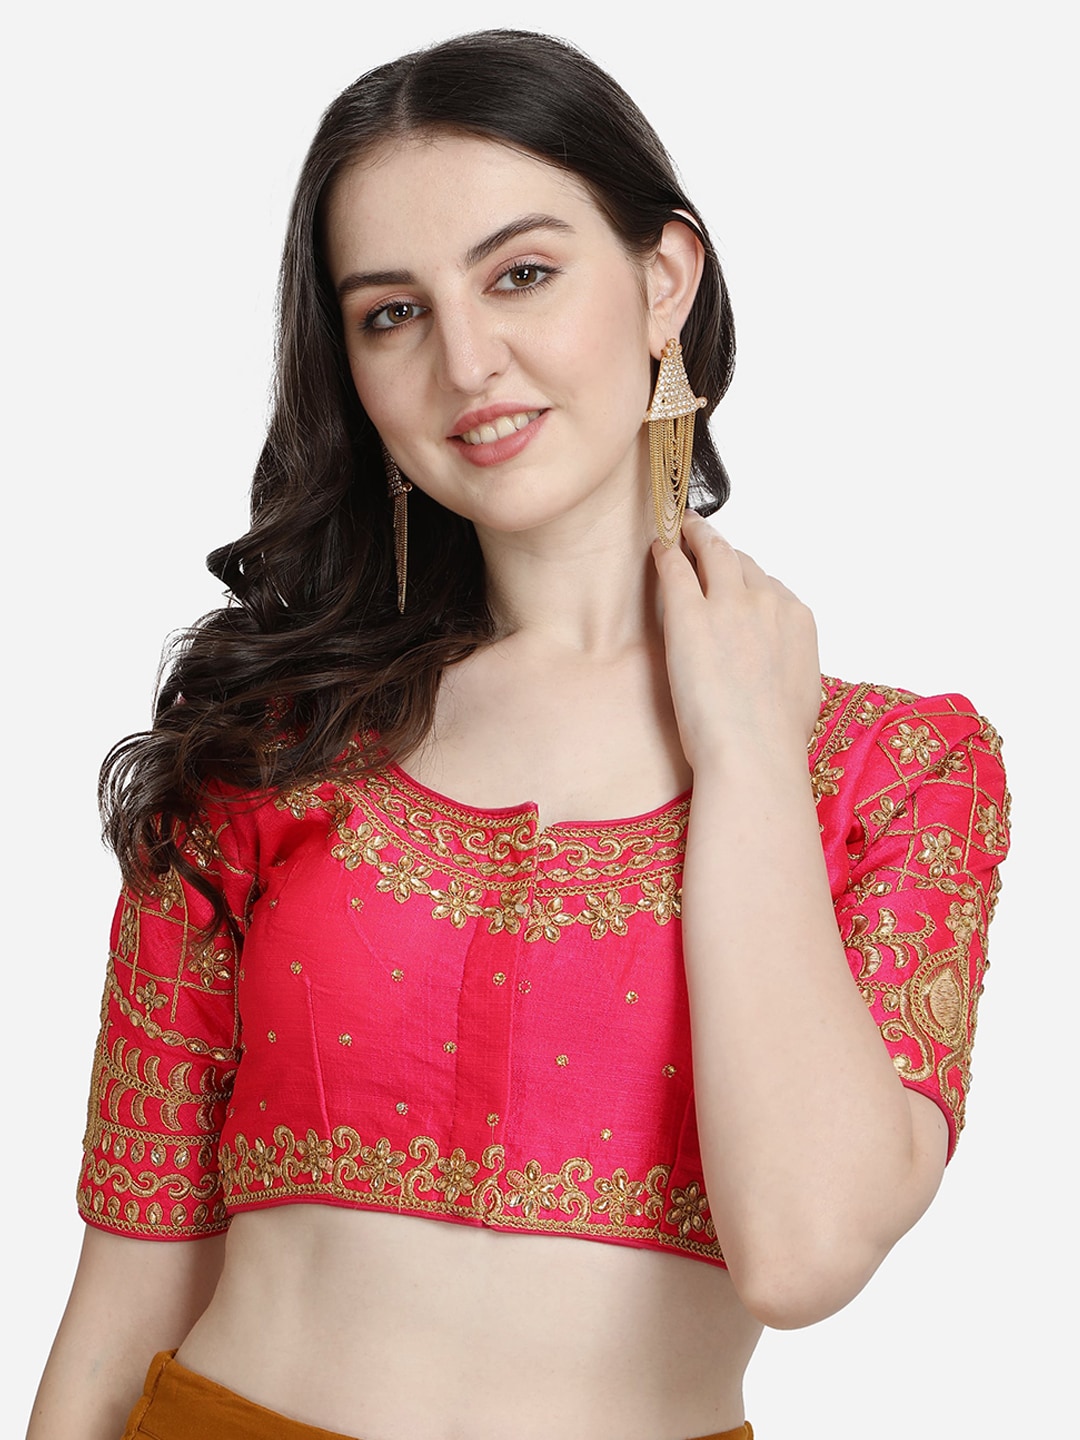 Mesmore Women Golden & Pink Embroidered Silk Saree Blouse Price in India